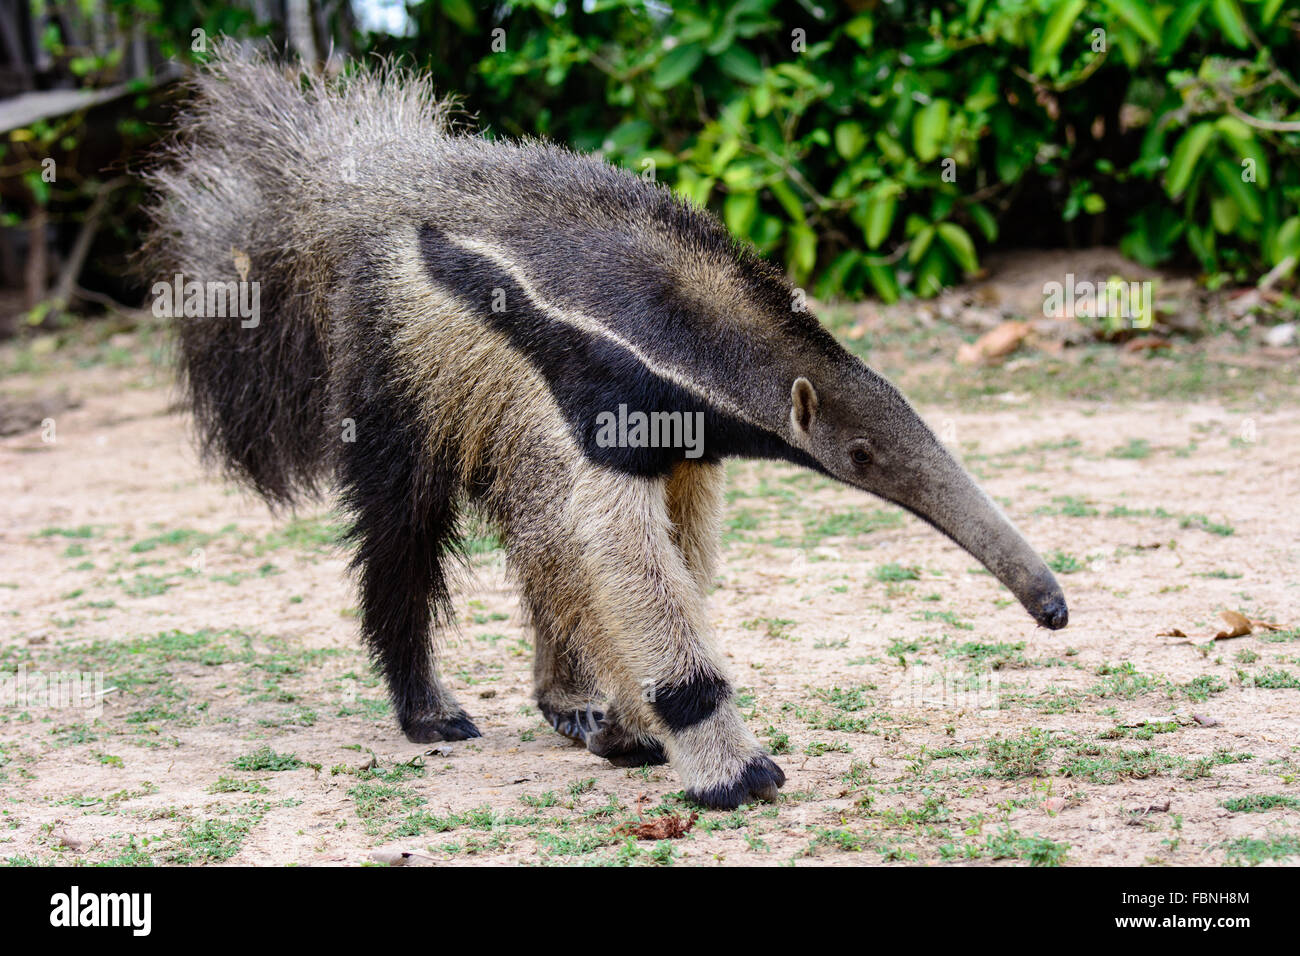 Giant Anteater on the move Stock Photo